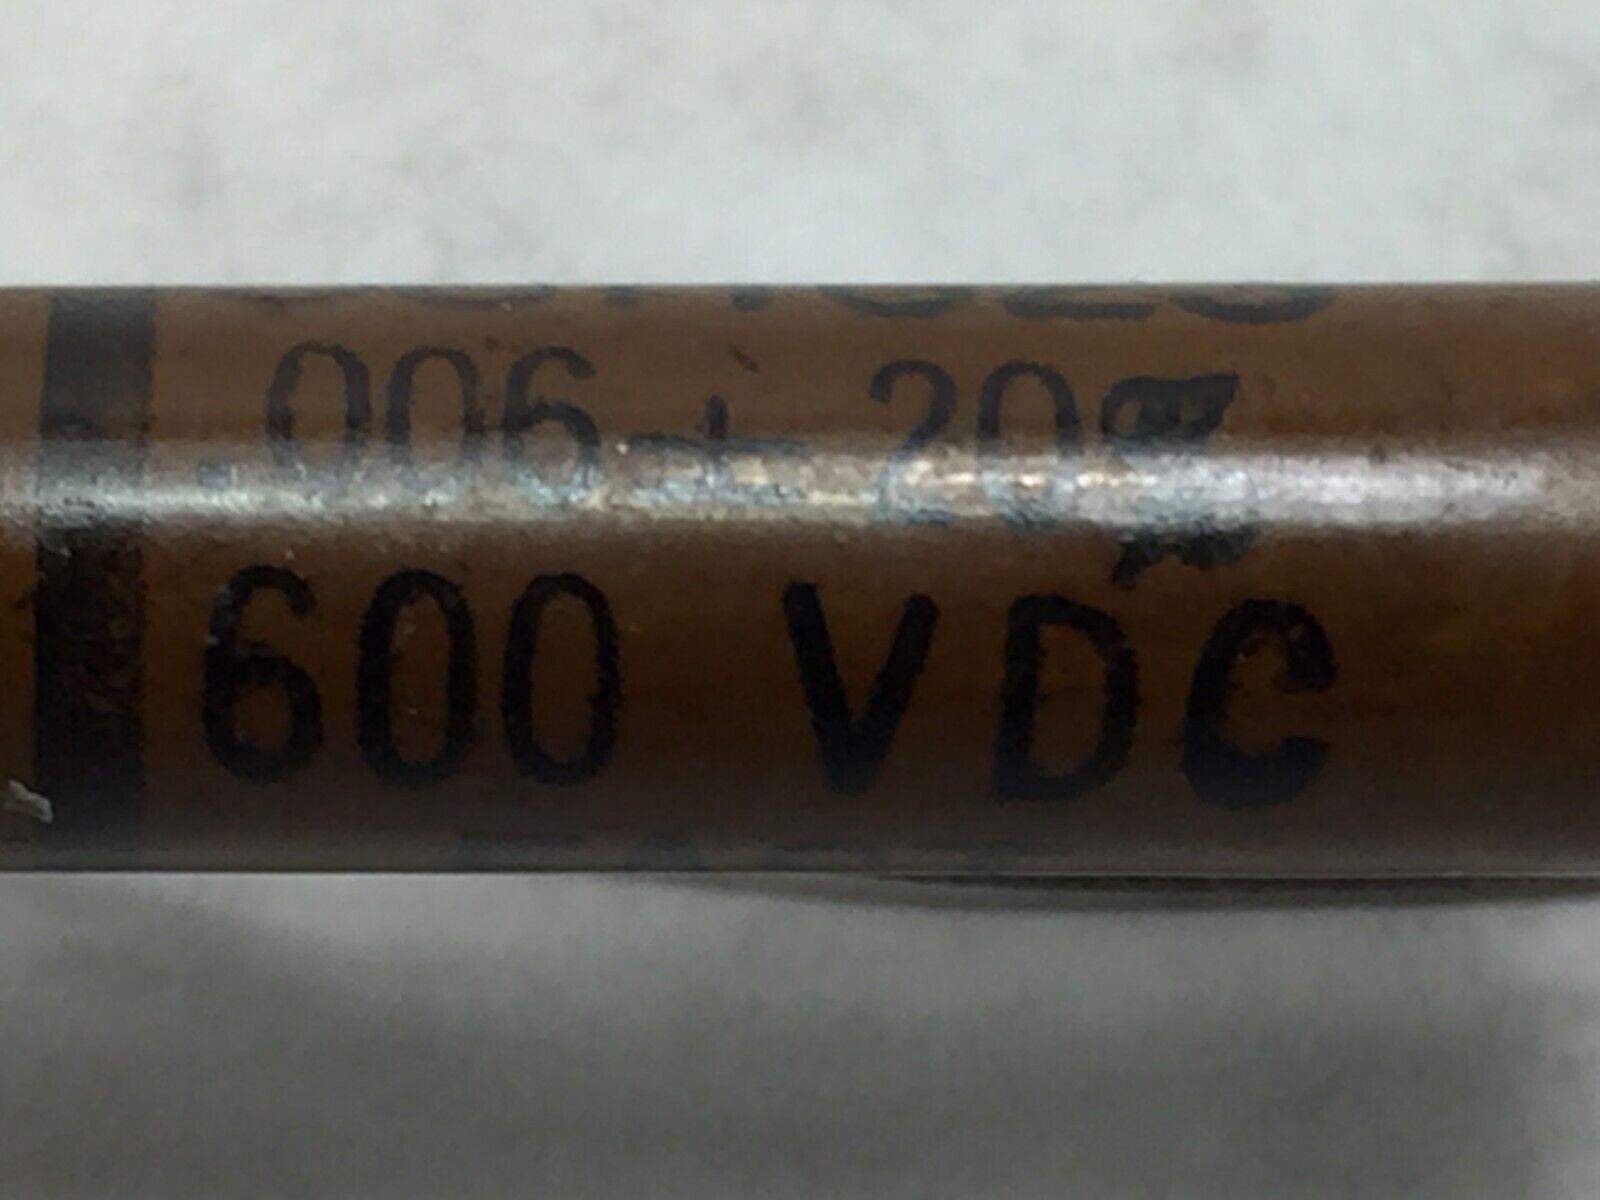 38H623 .006  600VDC 178703 Capacitor  Lot of 4